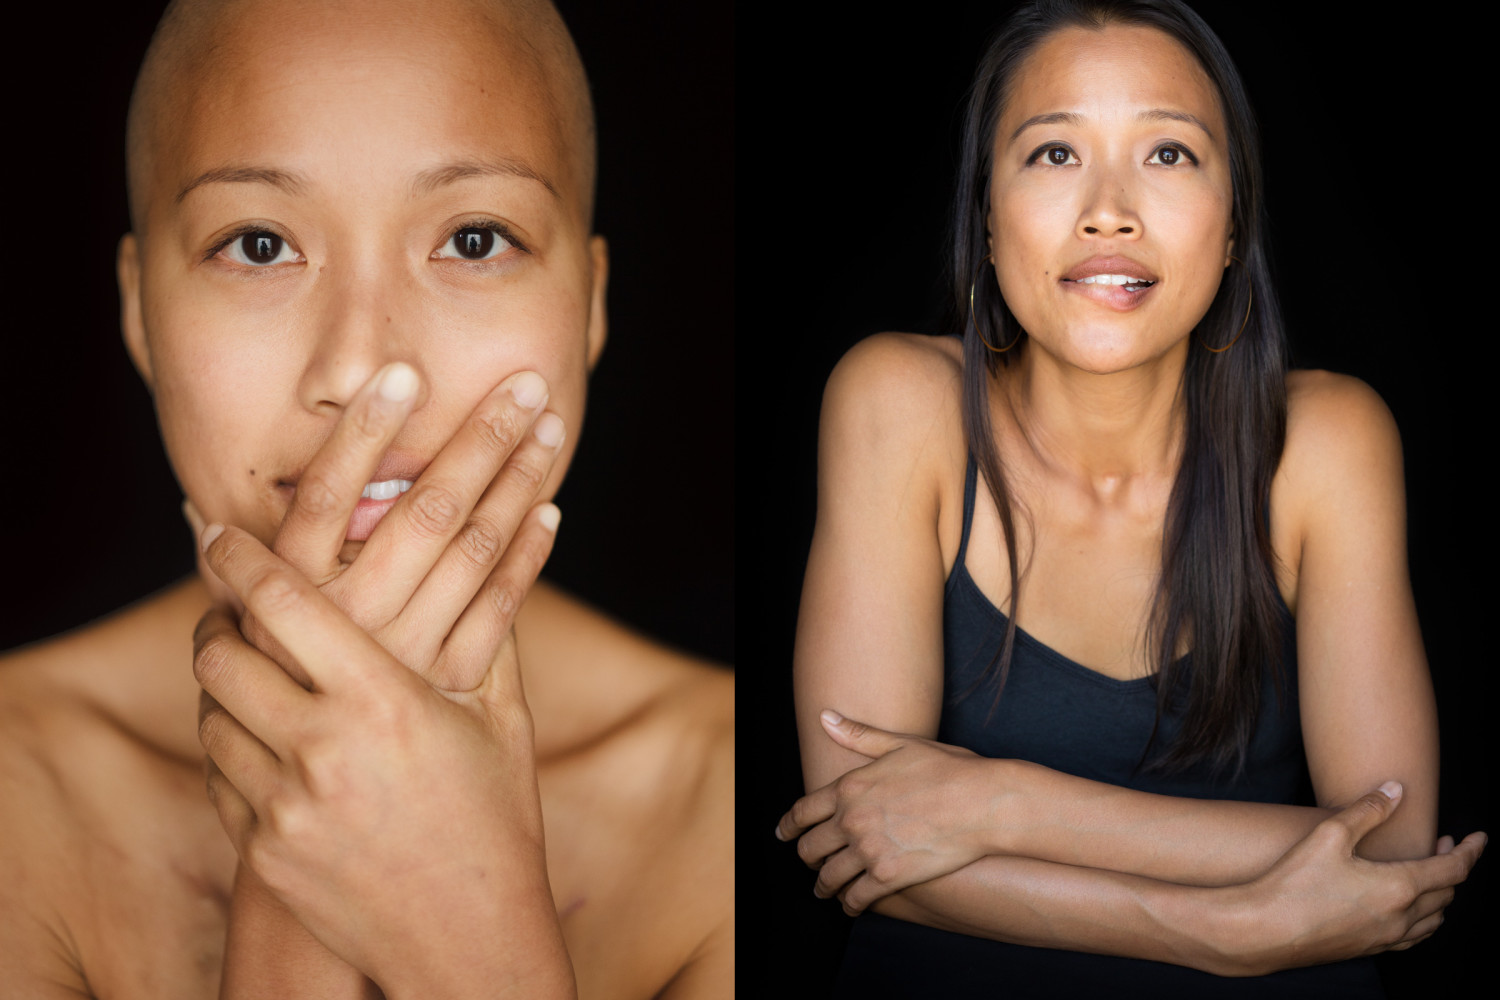 Facing Chemo: Moving Portraits of People Battling Cancer